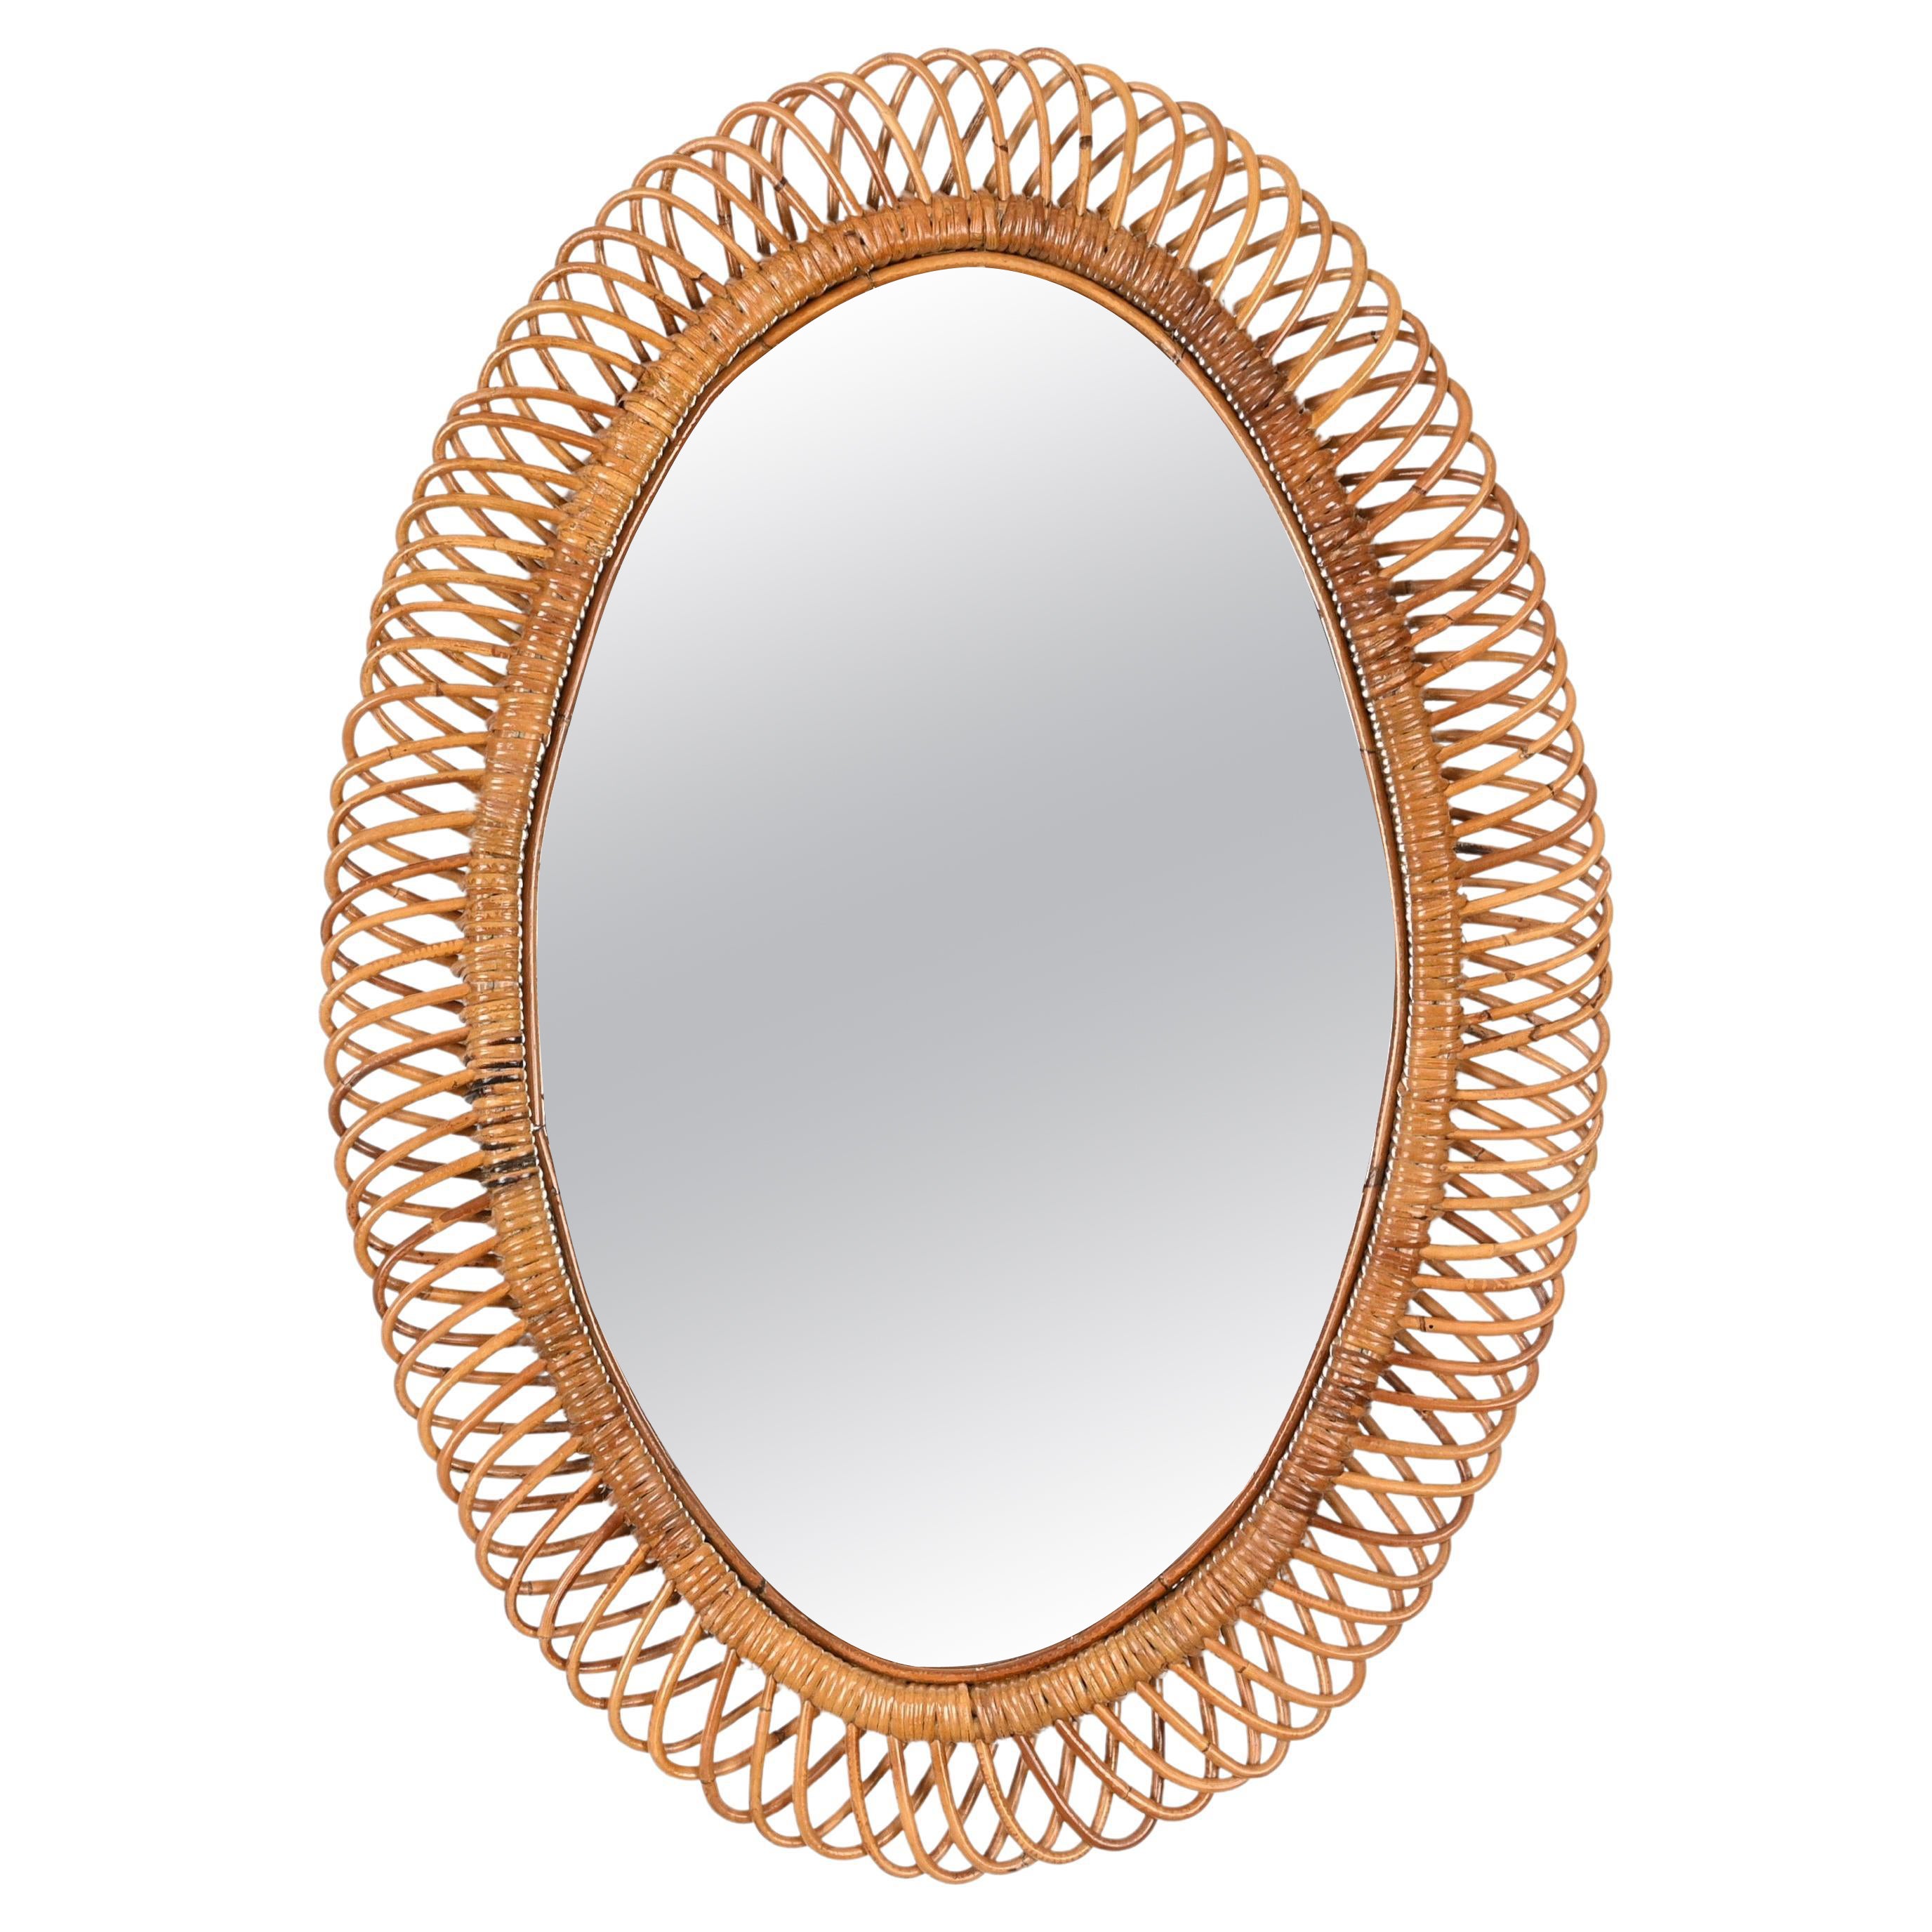 Franco Albini French Riviera Large Oval Mirror in Rattan and Wicker, Italy 1960s For Sale